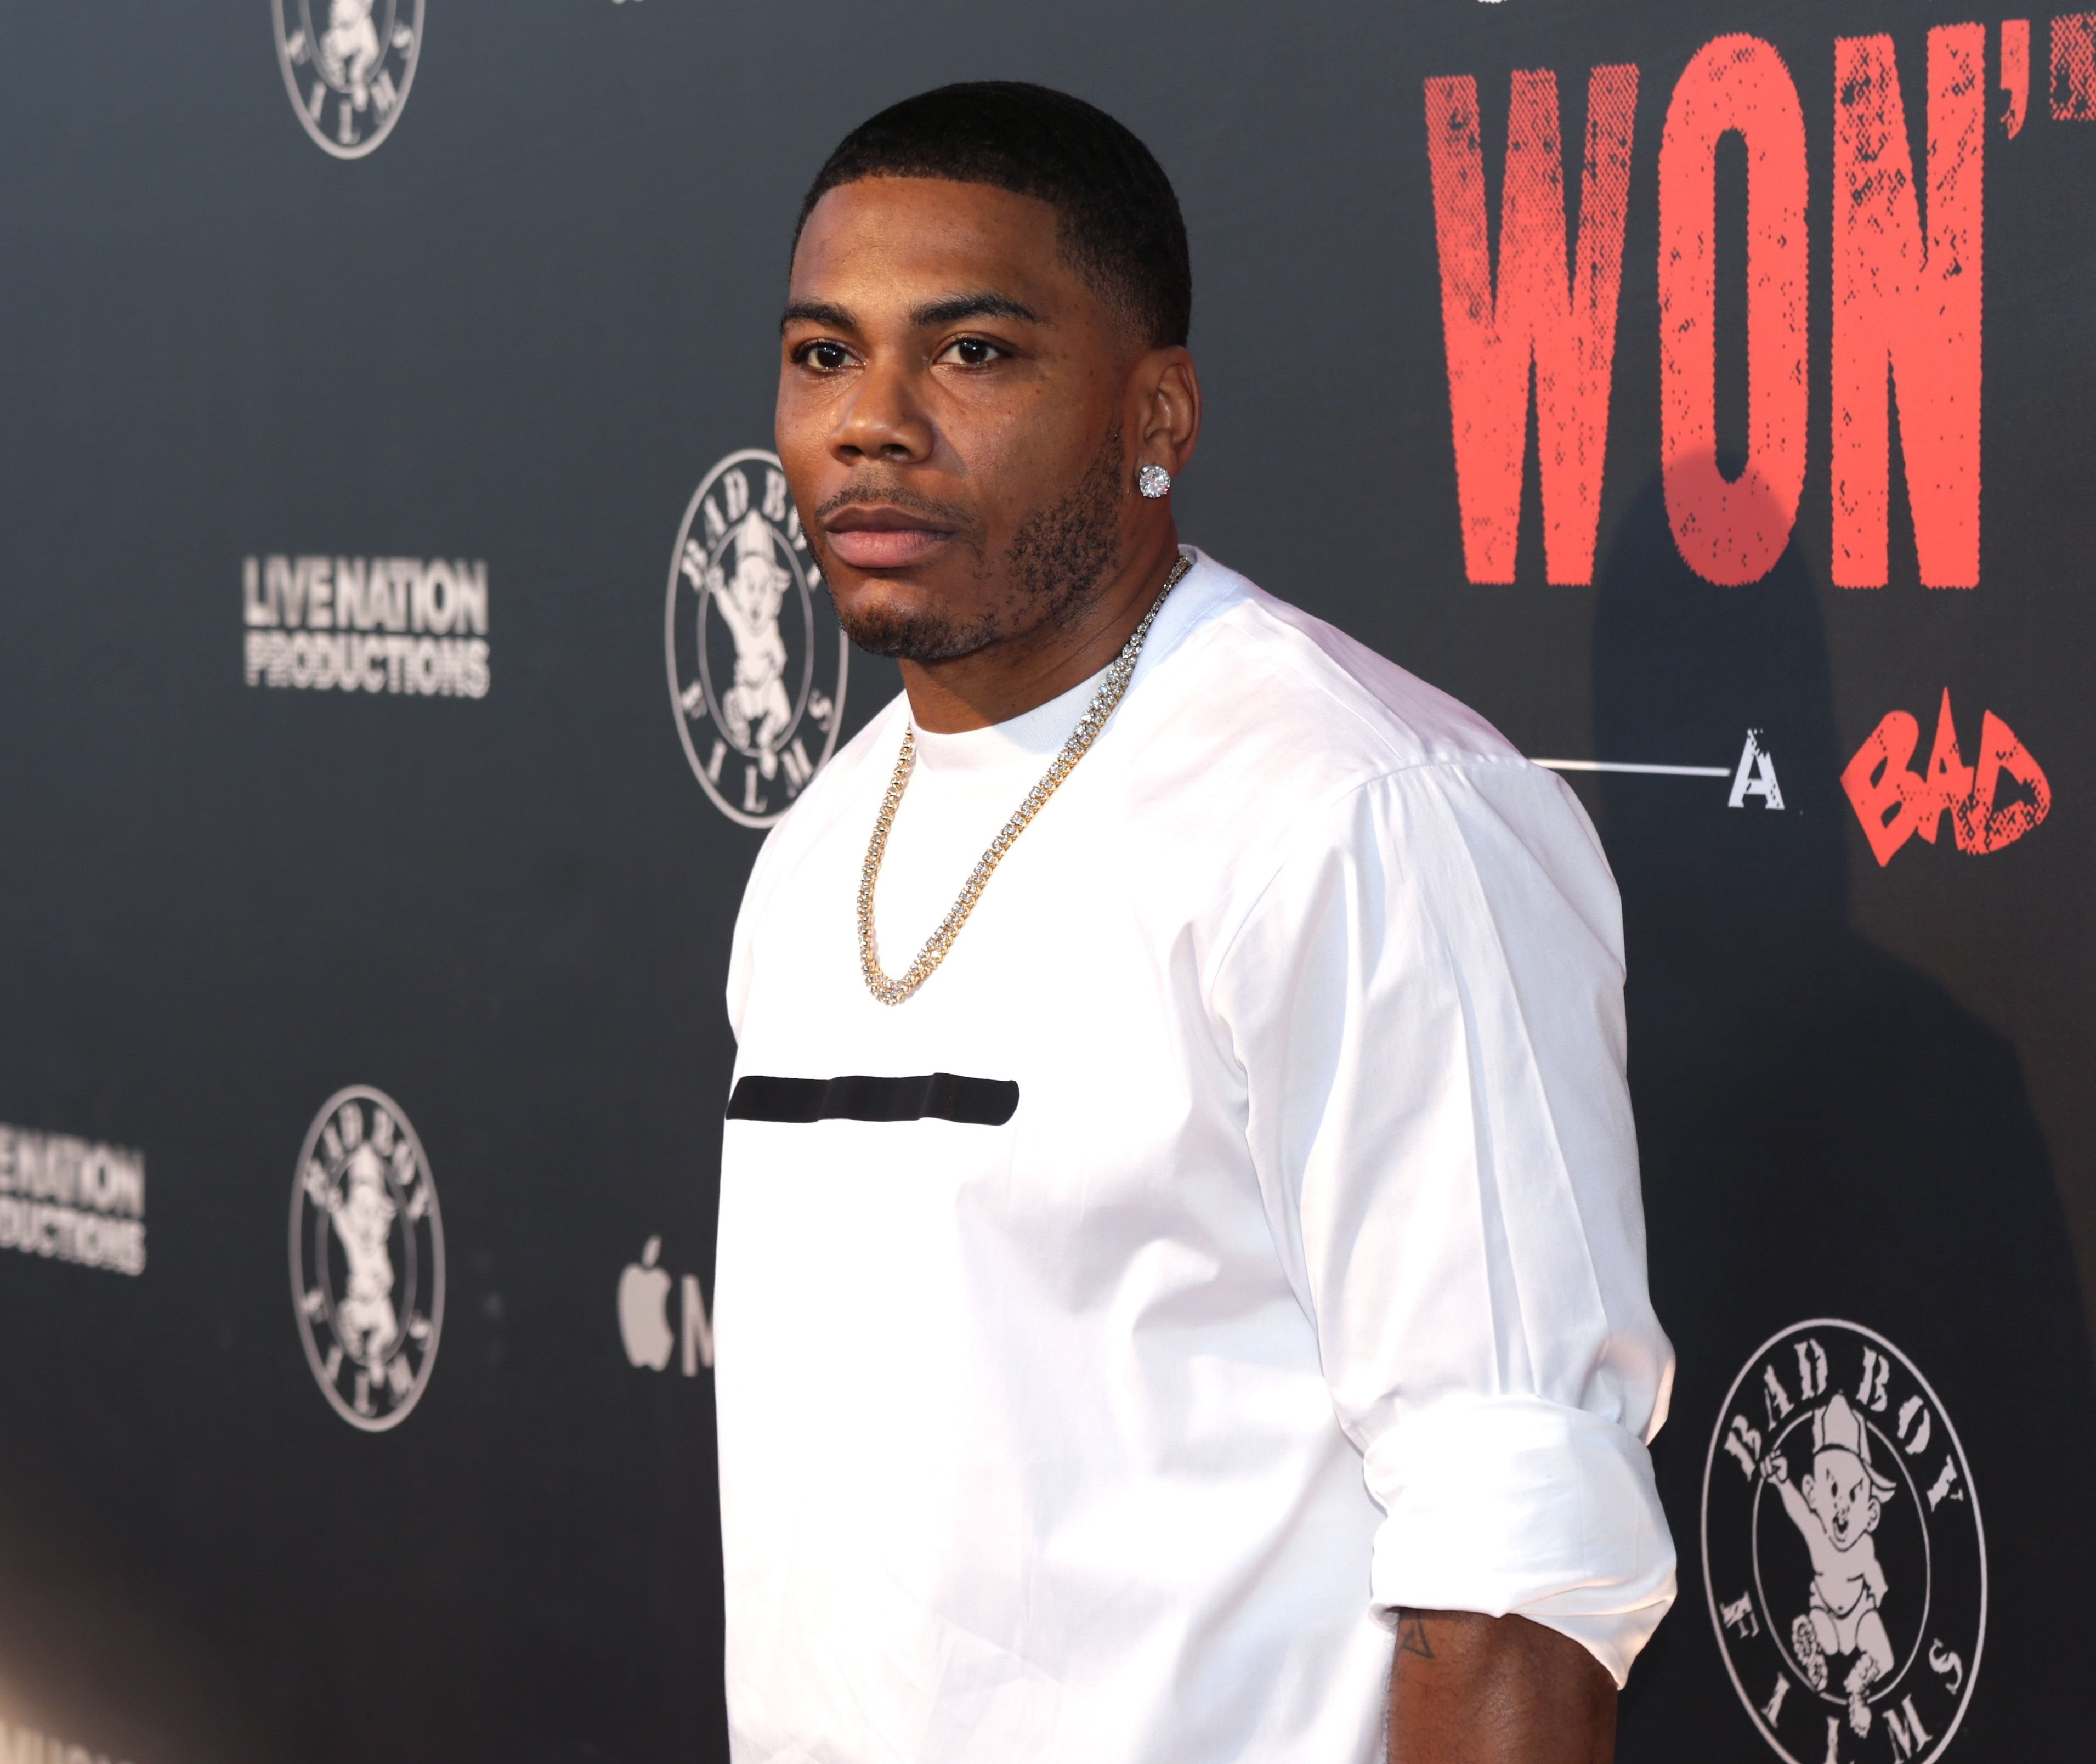 Rapper Nelly attends the premiere of "Can't Stop Won't Stop" on June 21, 2017. | Photo: Getty Images